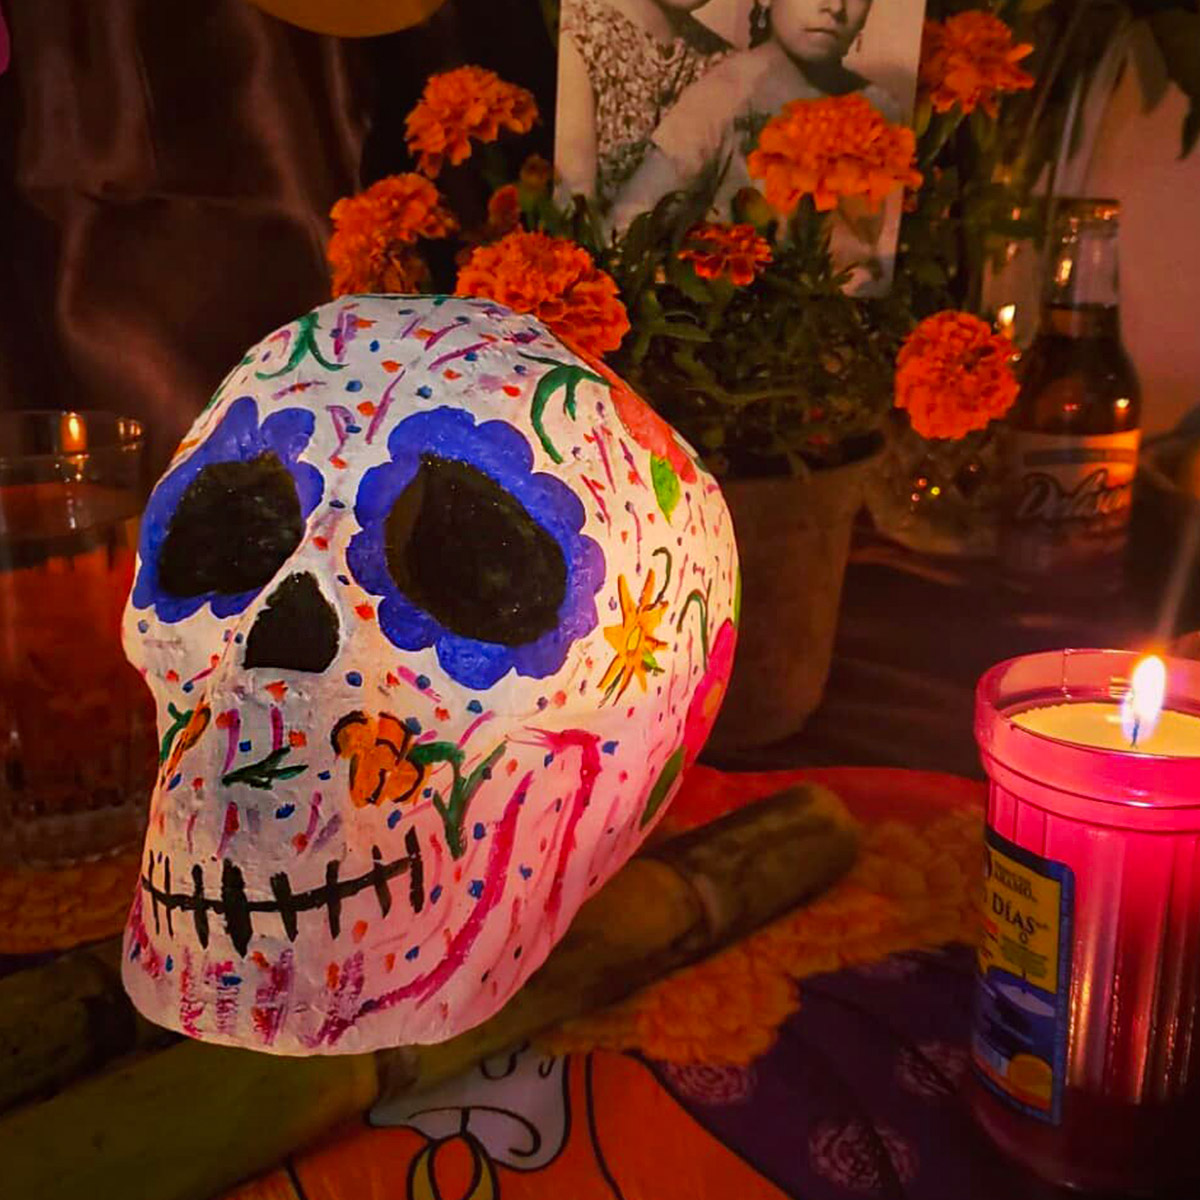 Marigolds used for day of the dead